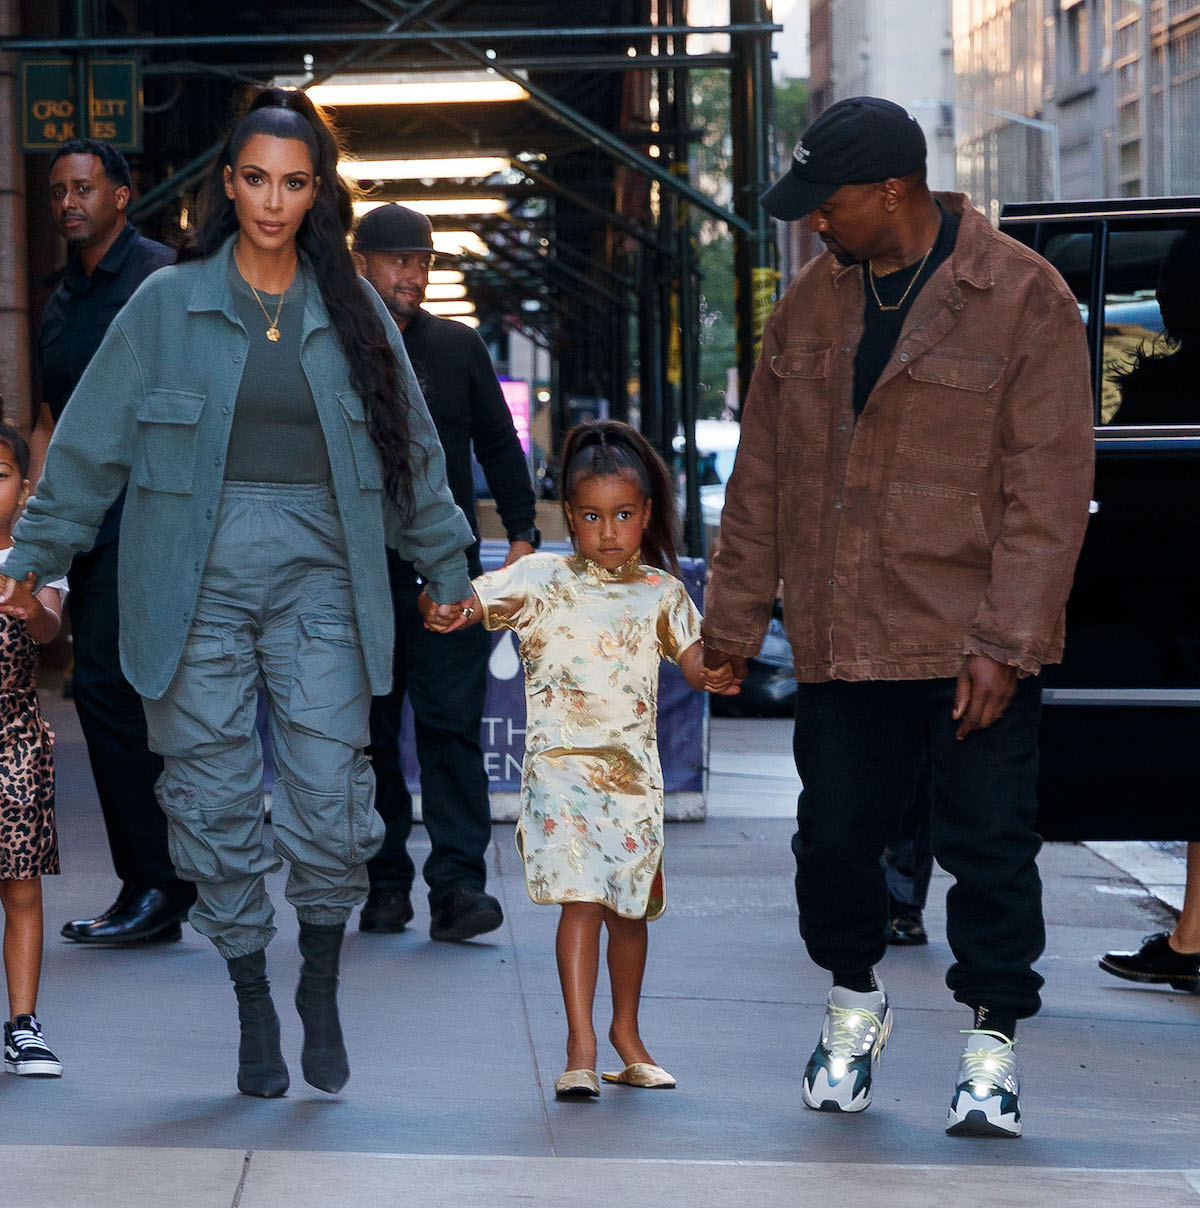 Kim Kardashian West Fires Back After Kanye West Claims Daughter North West Is on TikTok ‘Against [His] Will’